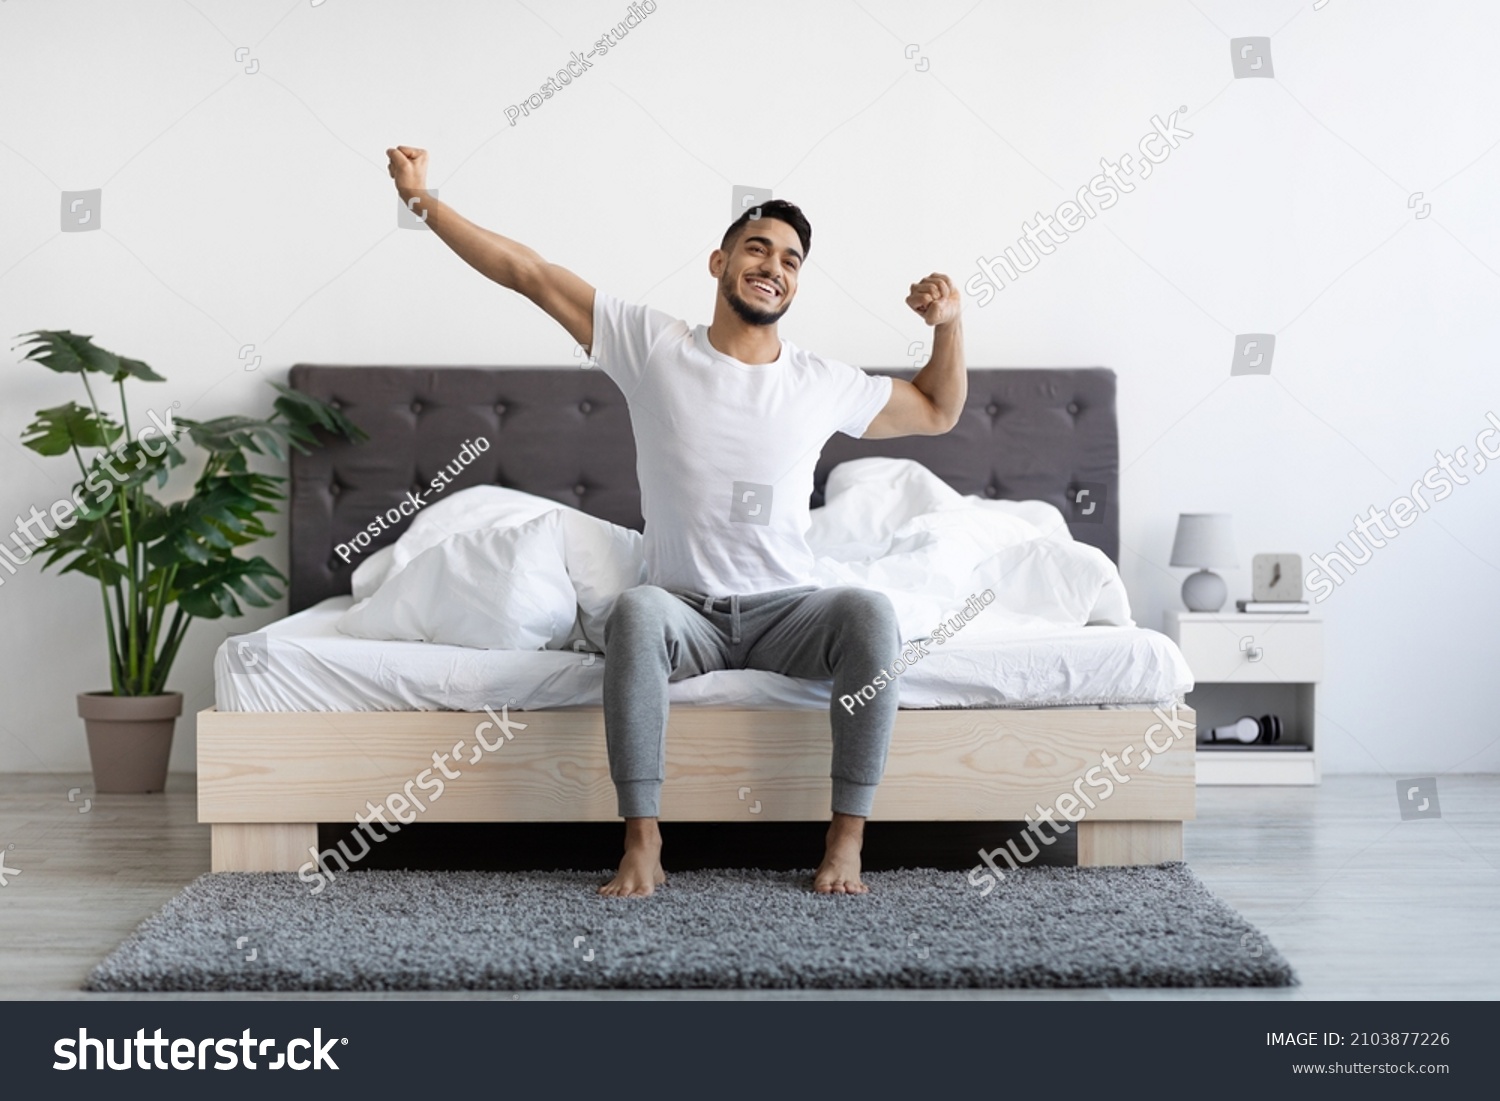 Handsome Happy Young Arab Guy Waking Up In The Morning, Sitting On Bed And Stretching After Good Sleep, Smiling Millennial Middle Eastern Man Having Good Mood, Enjoying Start Of New Day, Copy Space #2103877226